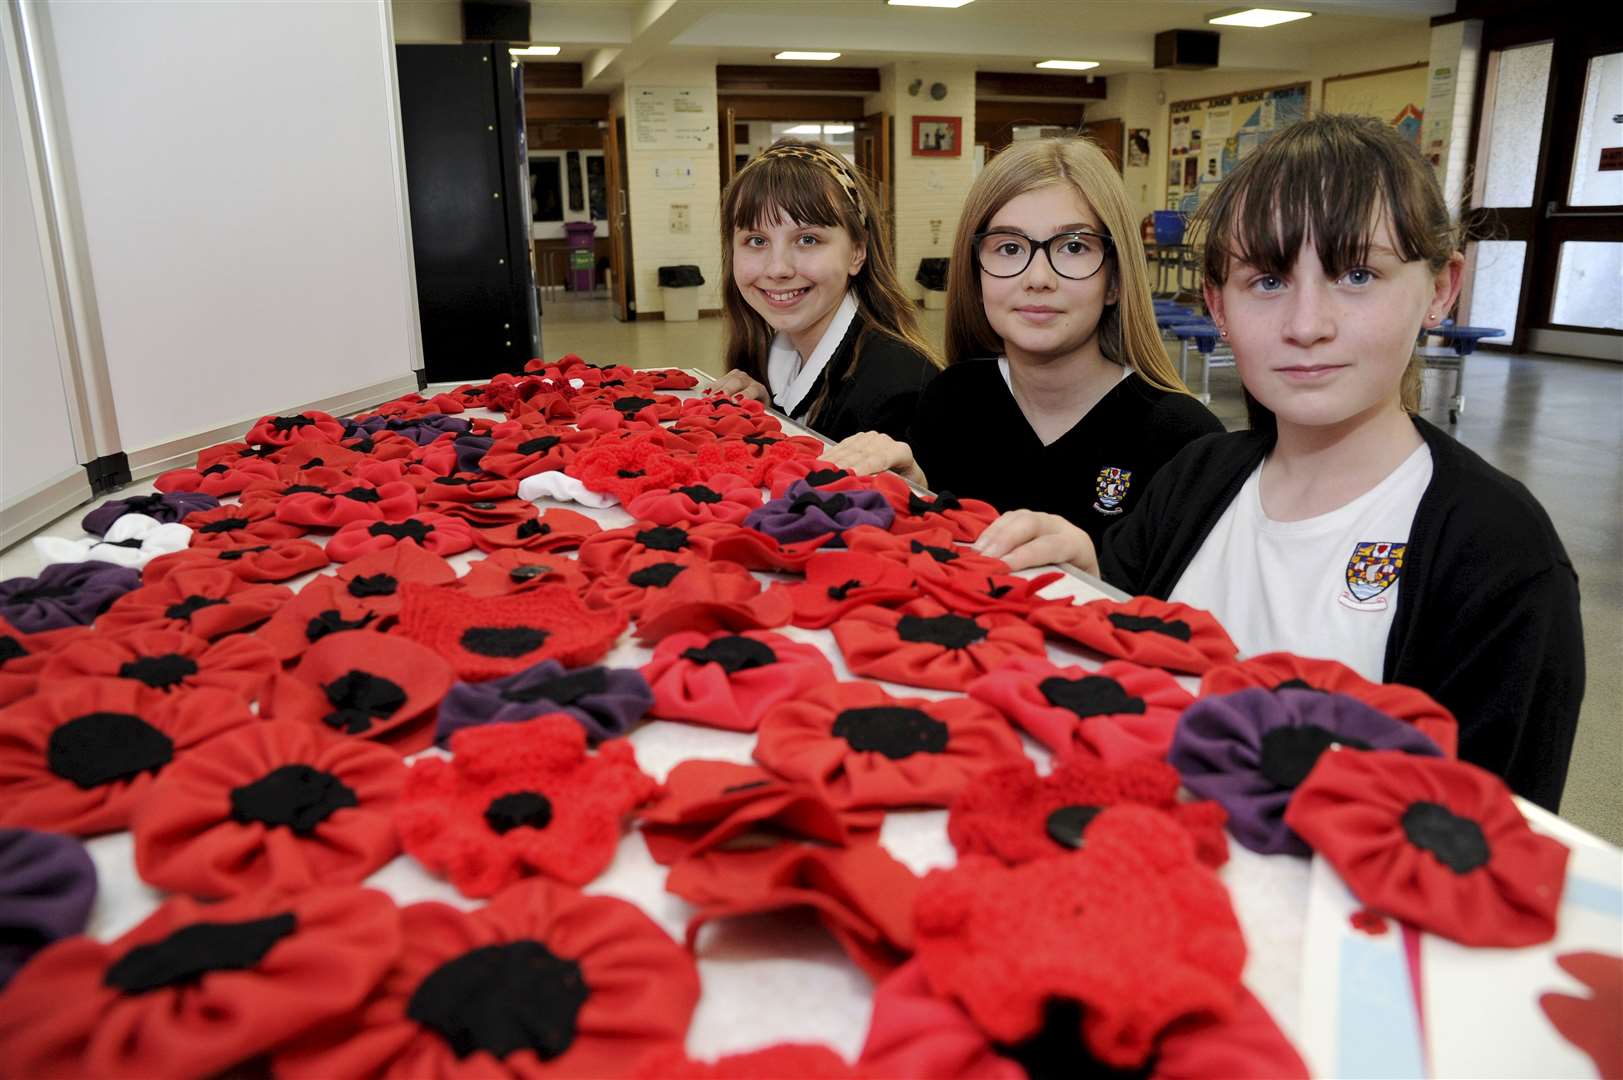 Admiring the school's poppy-making efforts are (from left) Sara McCormack, Erwin Mitchell and Maya Cormack. Picture: Eric Cormack.